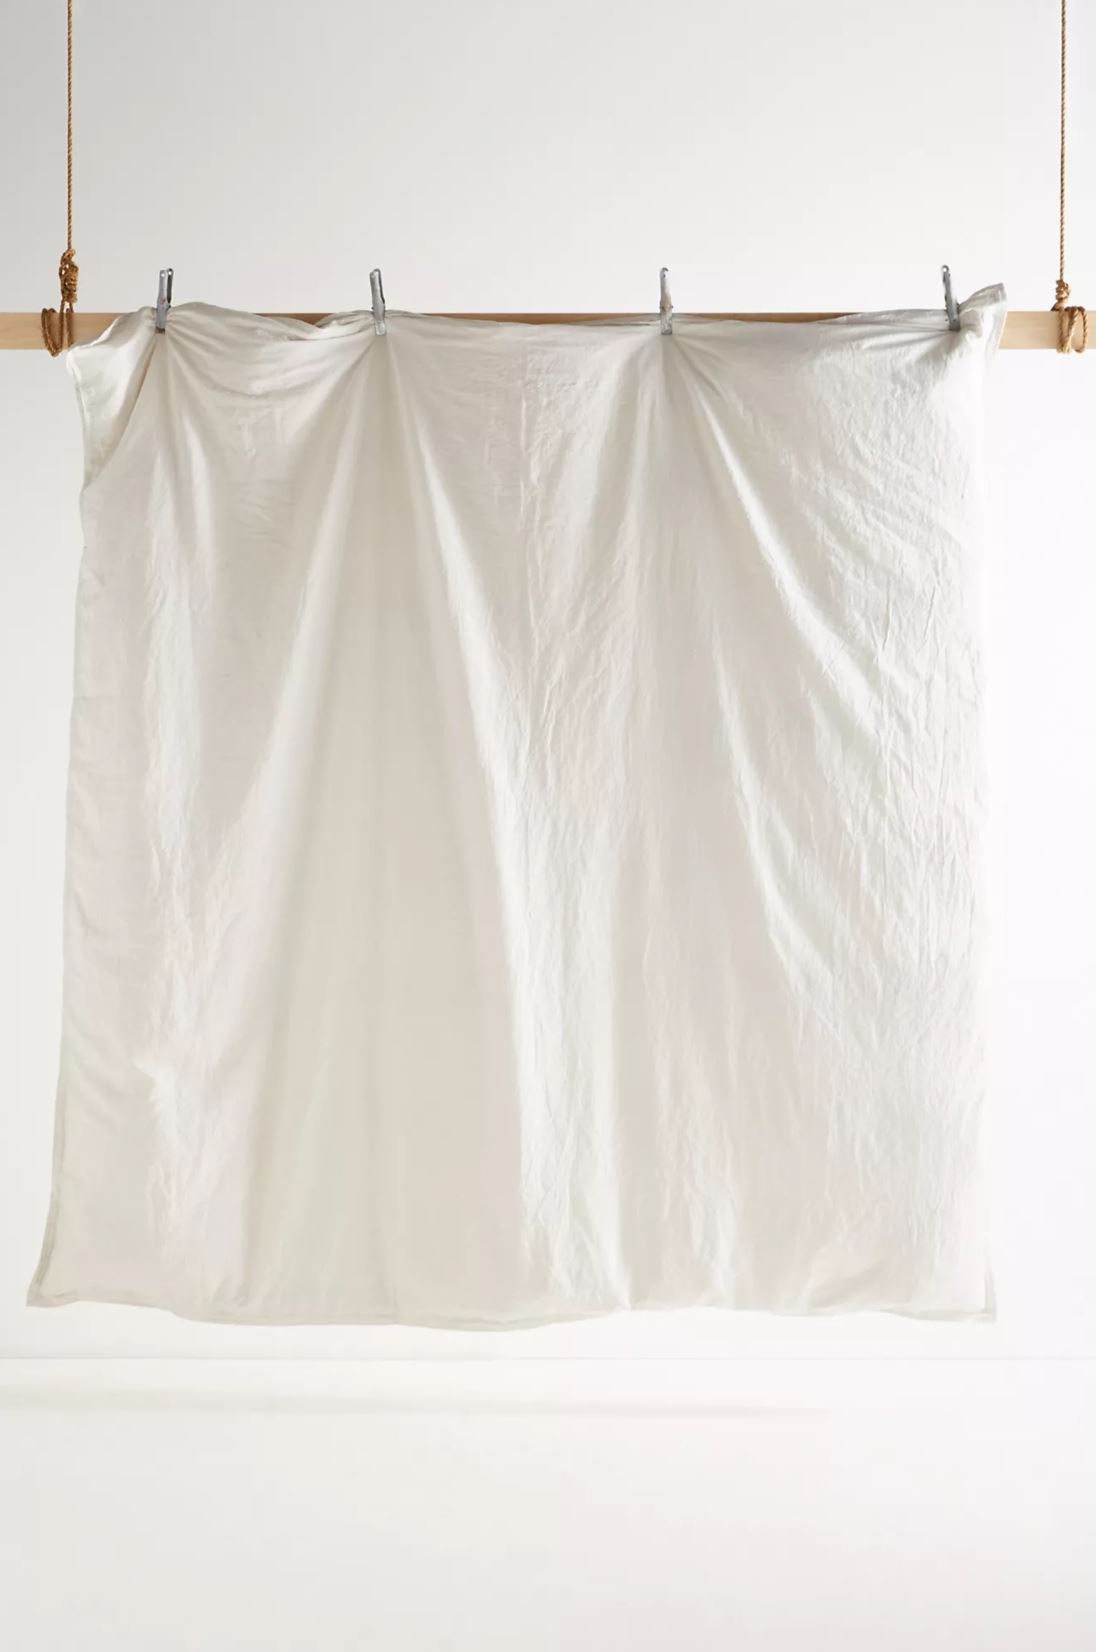 Relaxed Linen-Cotton Duvet Cover By Anthropologie in Grey Size KG TOP/BED - Image 2